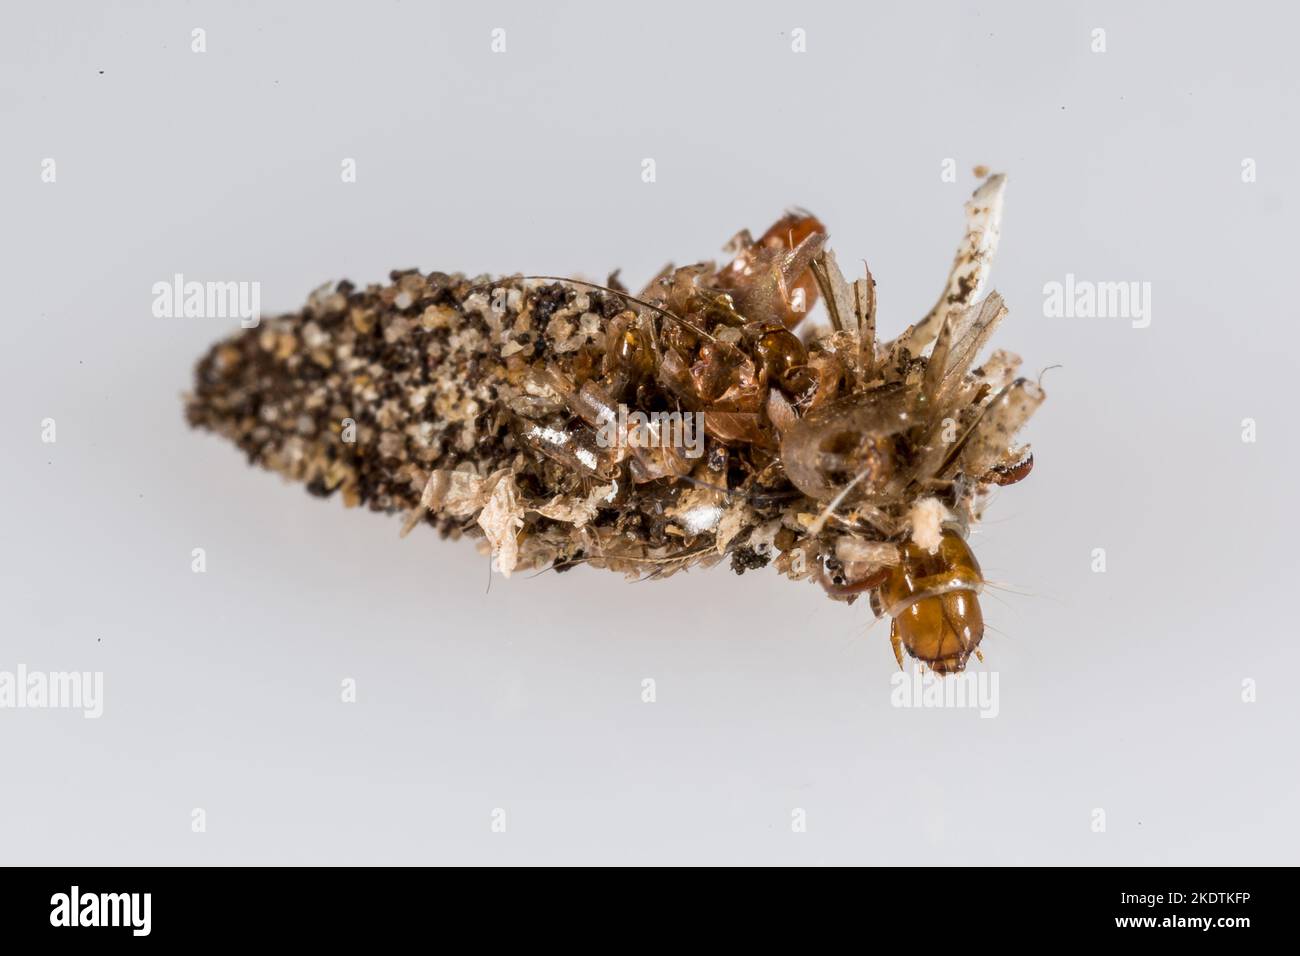 Dahlica triquetrella (Hübner, 1813) moth larvae in their protective case which is covered in grains of sand and insect exoskeletons - on a neutral bgd Stock Photo